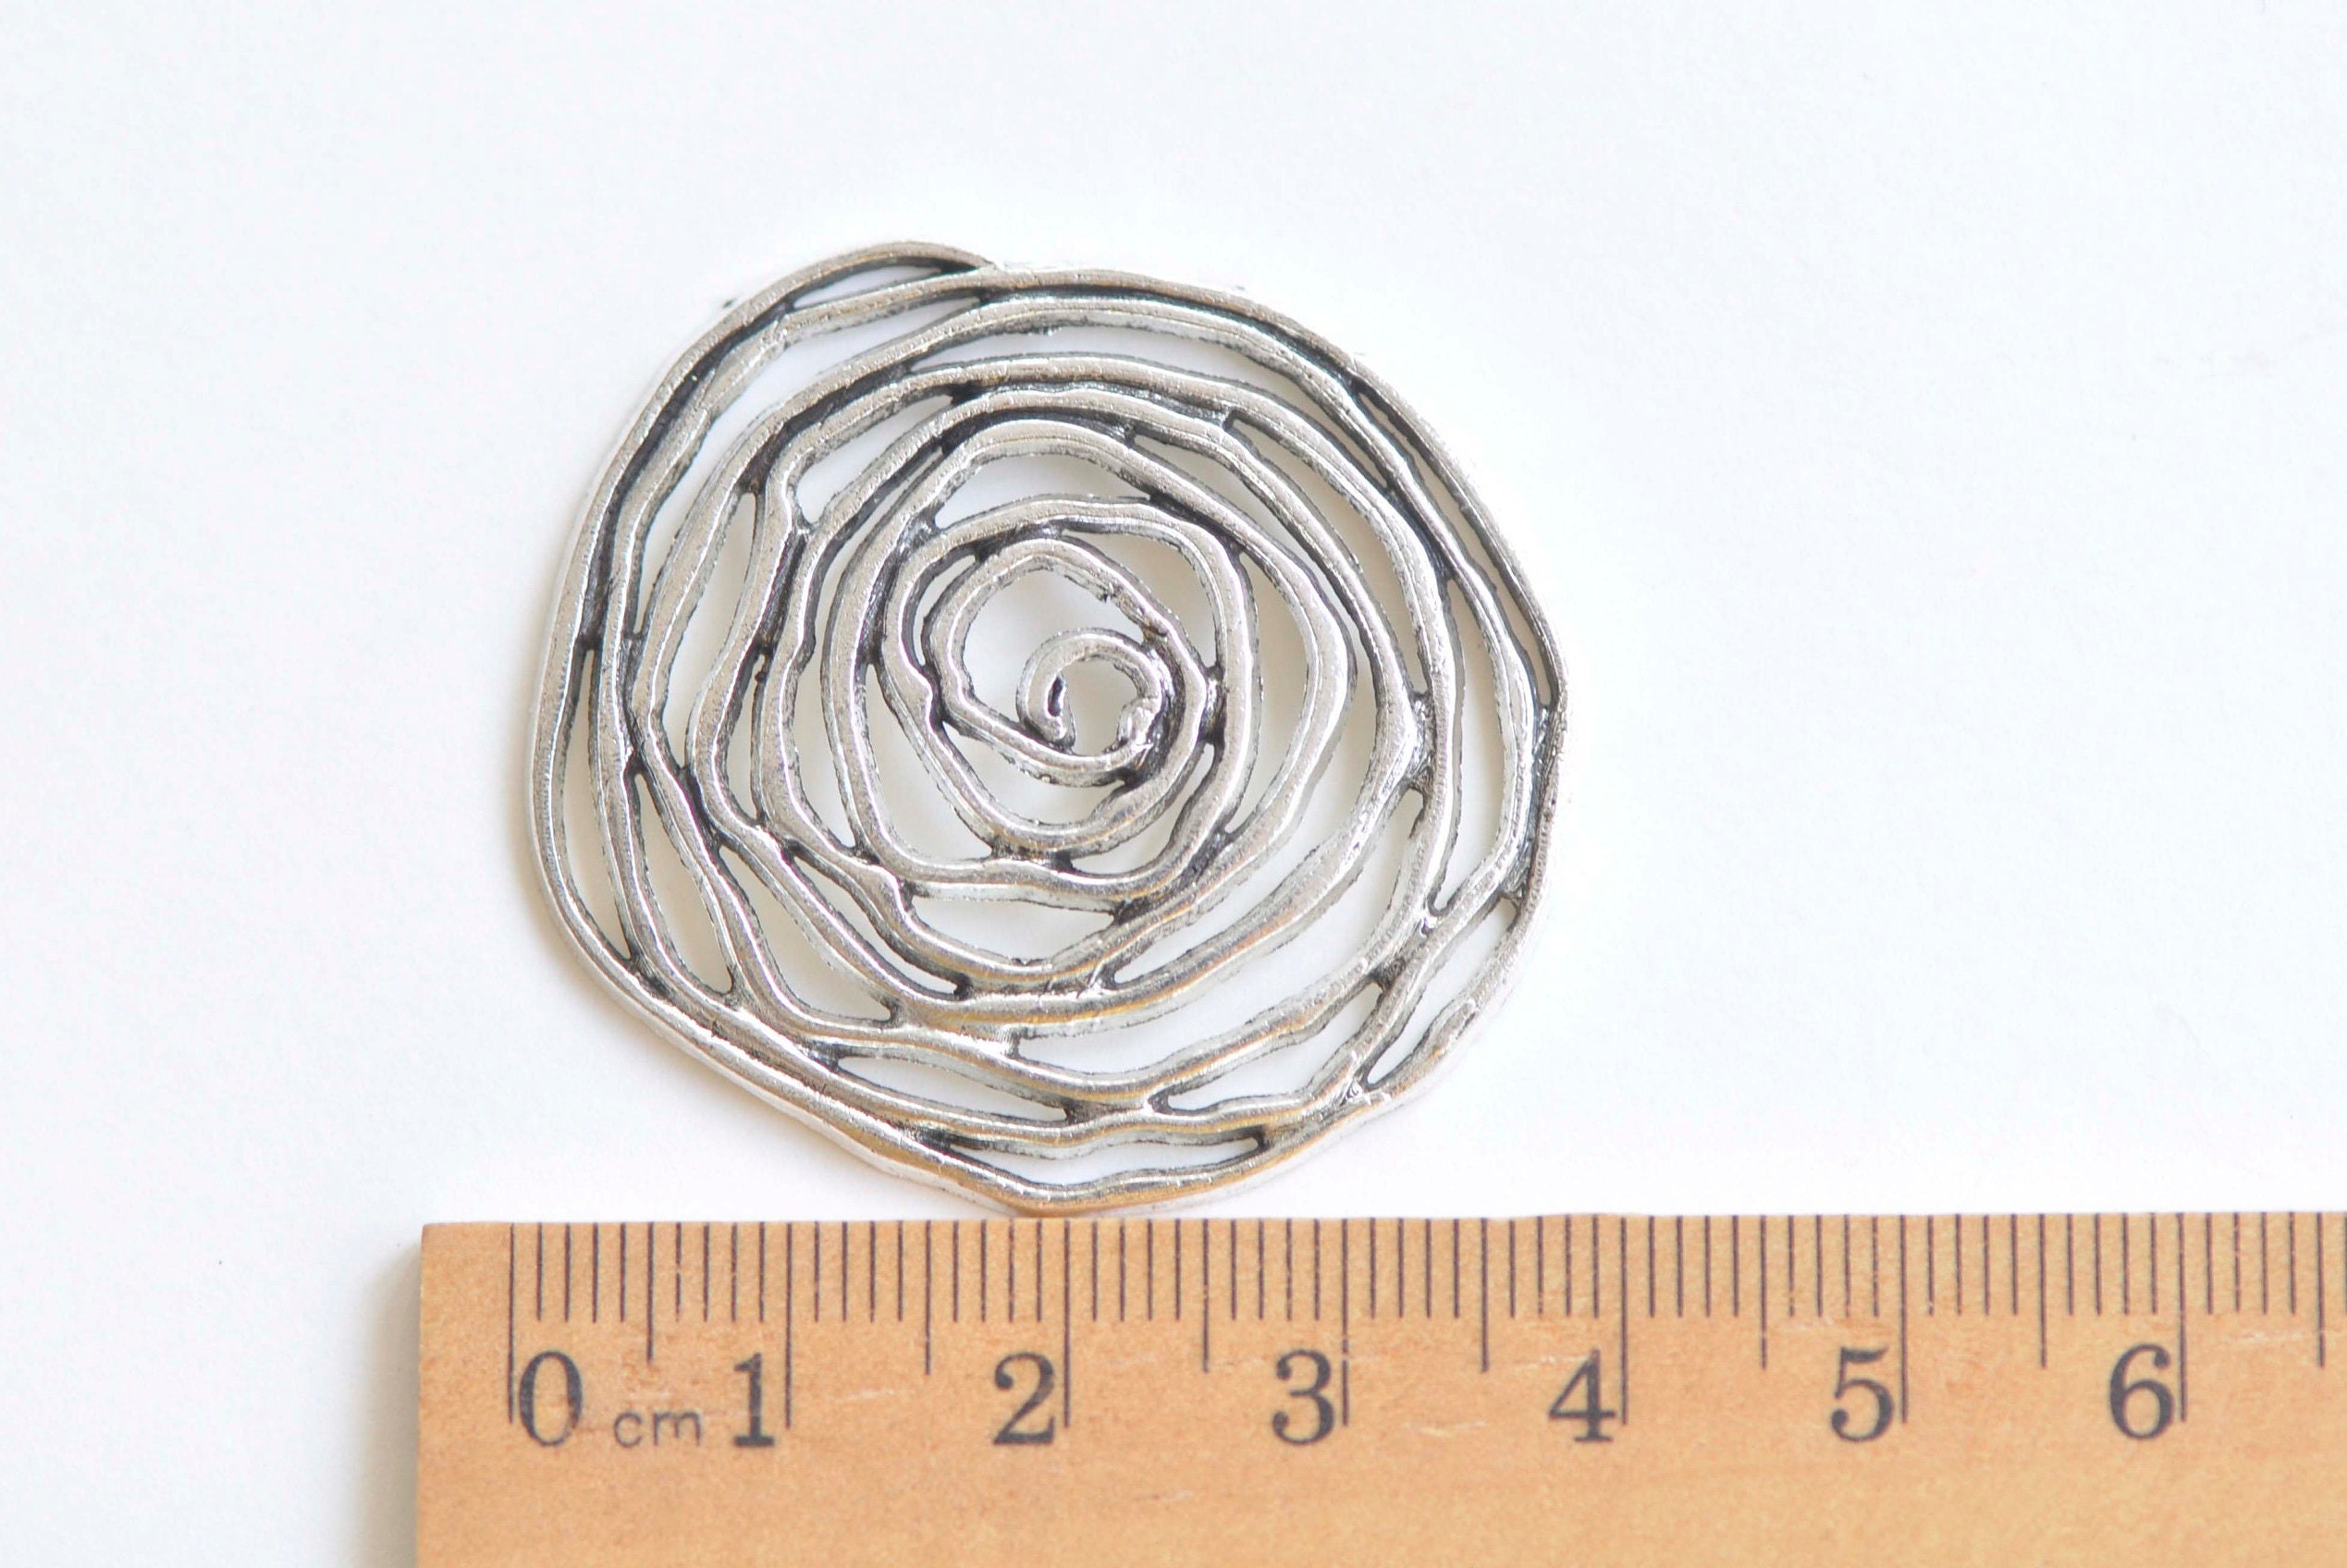  4pcs 37x36mm Filigree Flower Rose Charms Pendant Antique Silver  Color for Earring Making Necklace Making